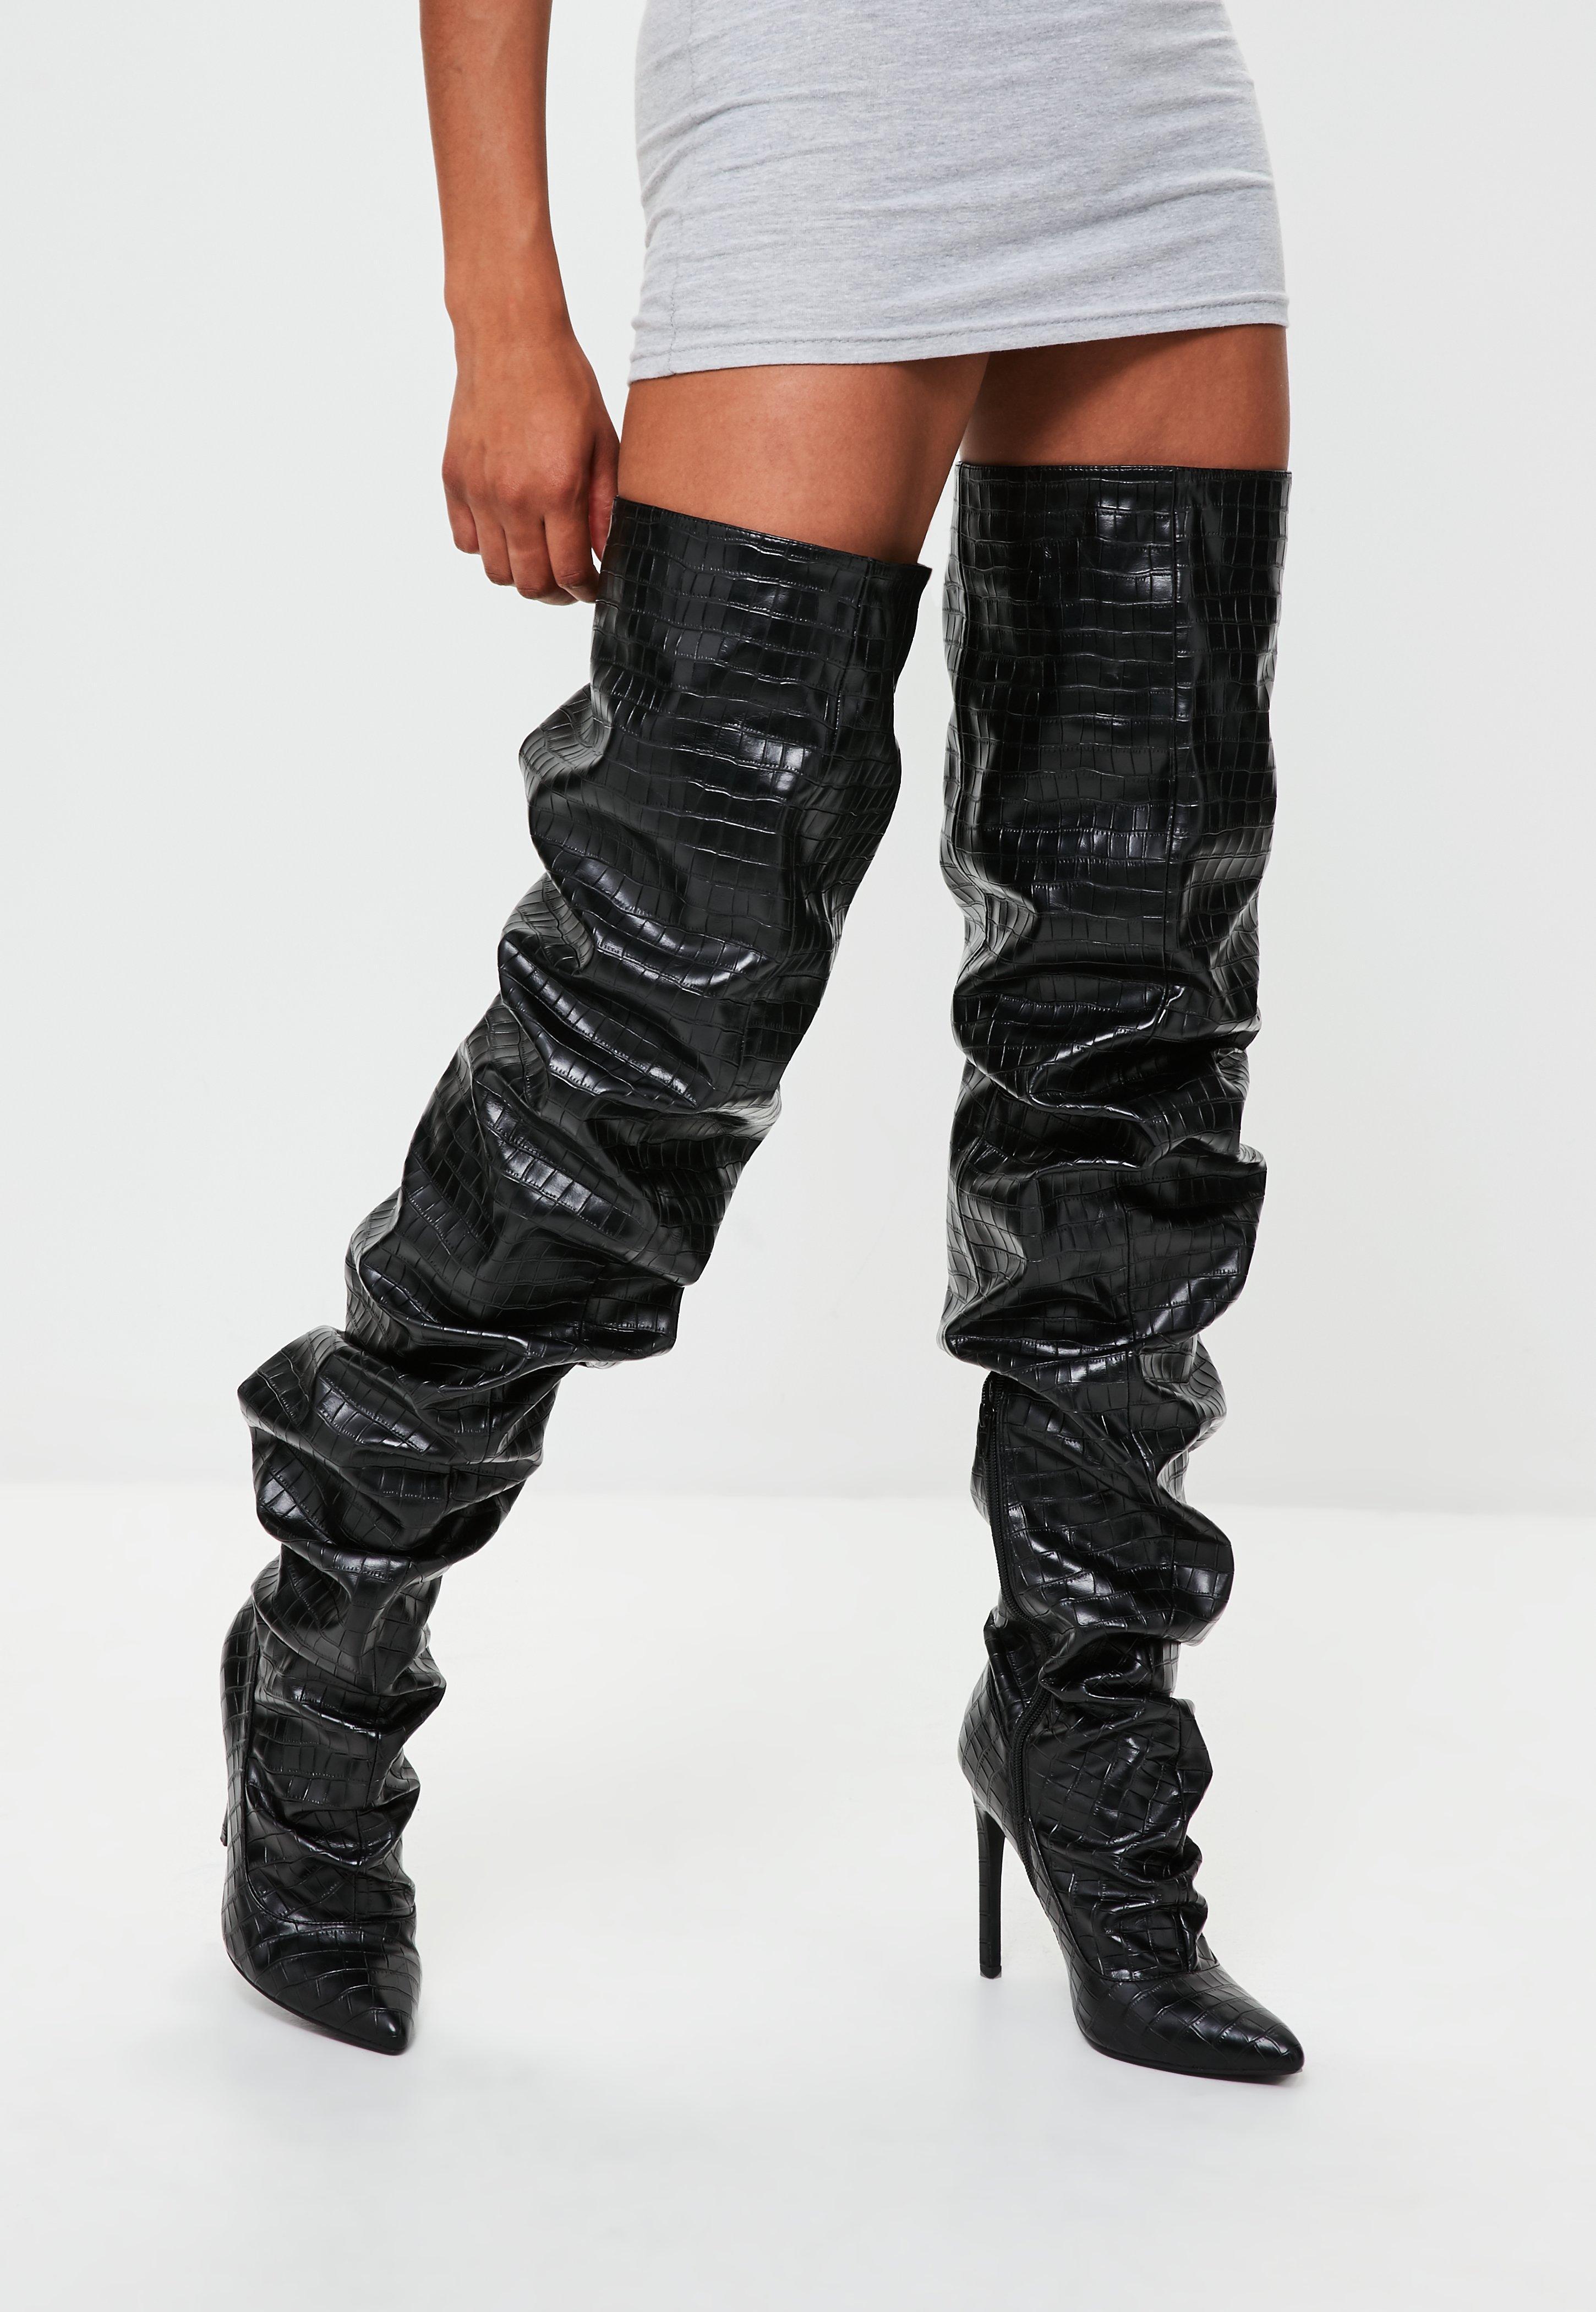 thigh high slouch boots